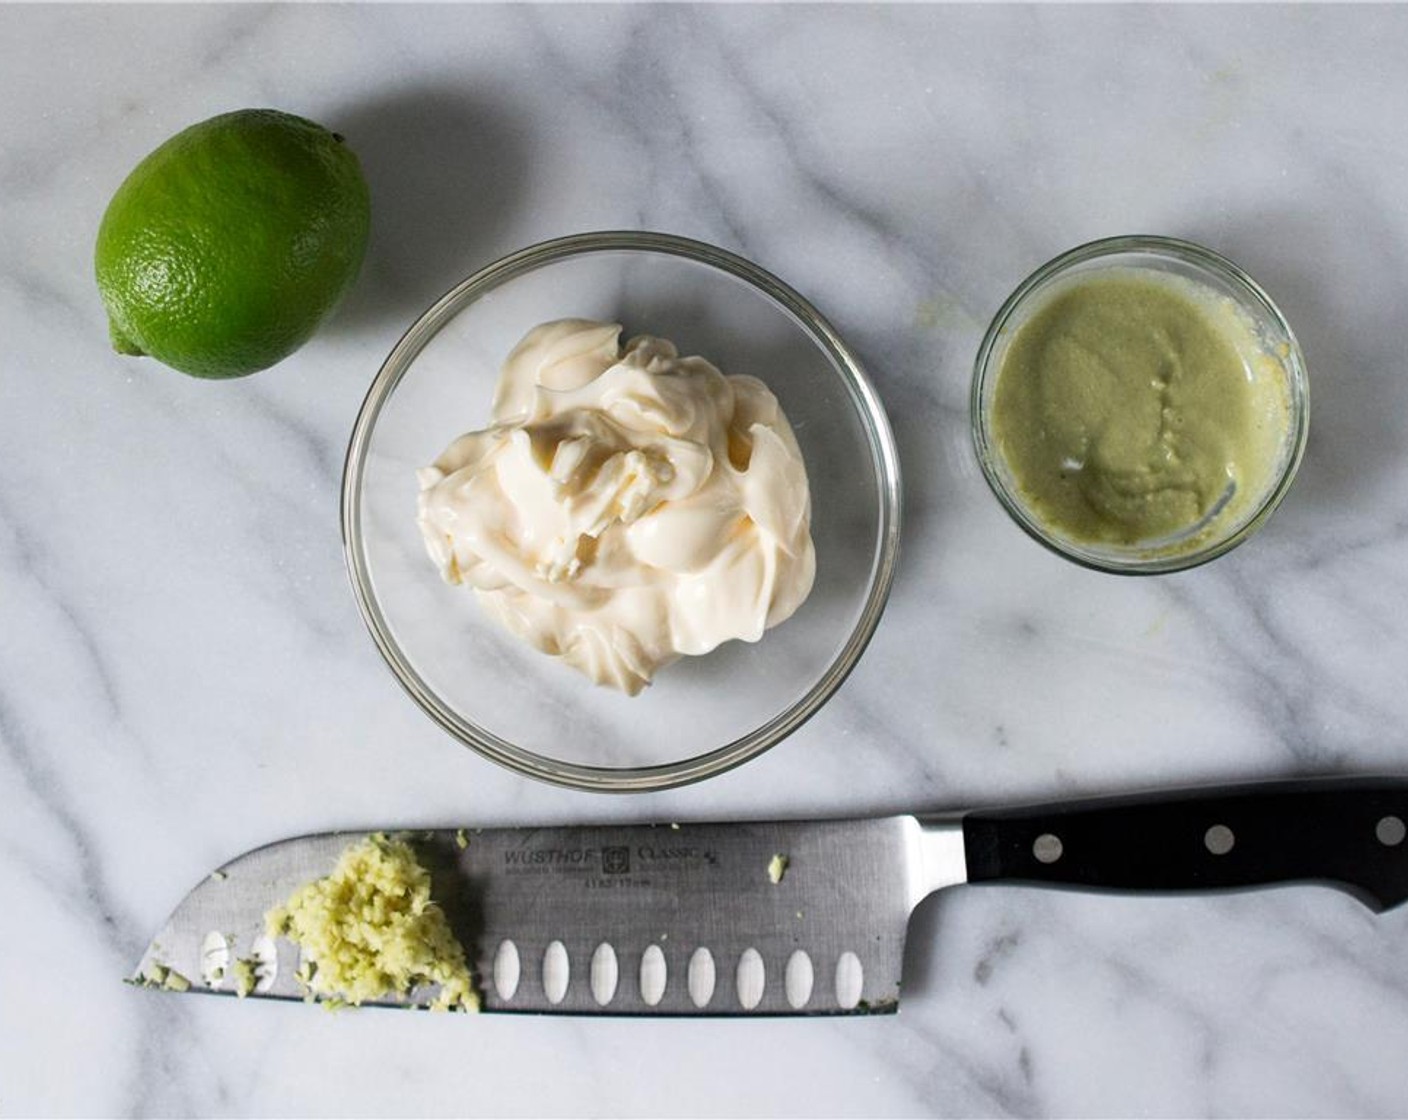 step 4 Make the wasabi mayo. In a small bowl, add the Wasabi Paste (1 1/2 Tbsp), Mayonnaise (1/2 cup), Lime (1), and Fresh Ginger (1 tsp). Stir well to combine. Cover and refrigerate until ready to use.